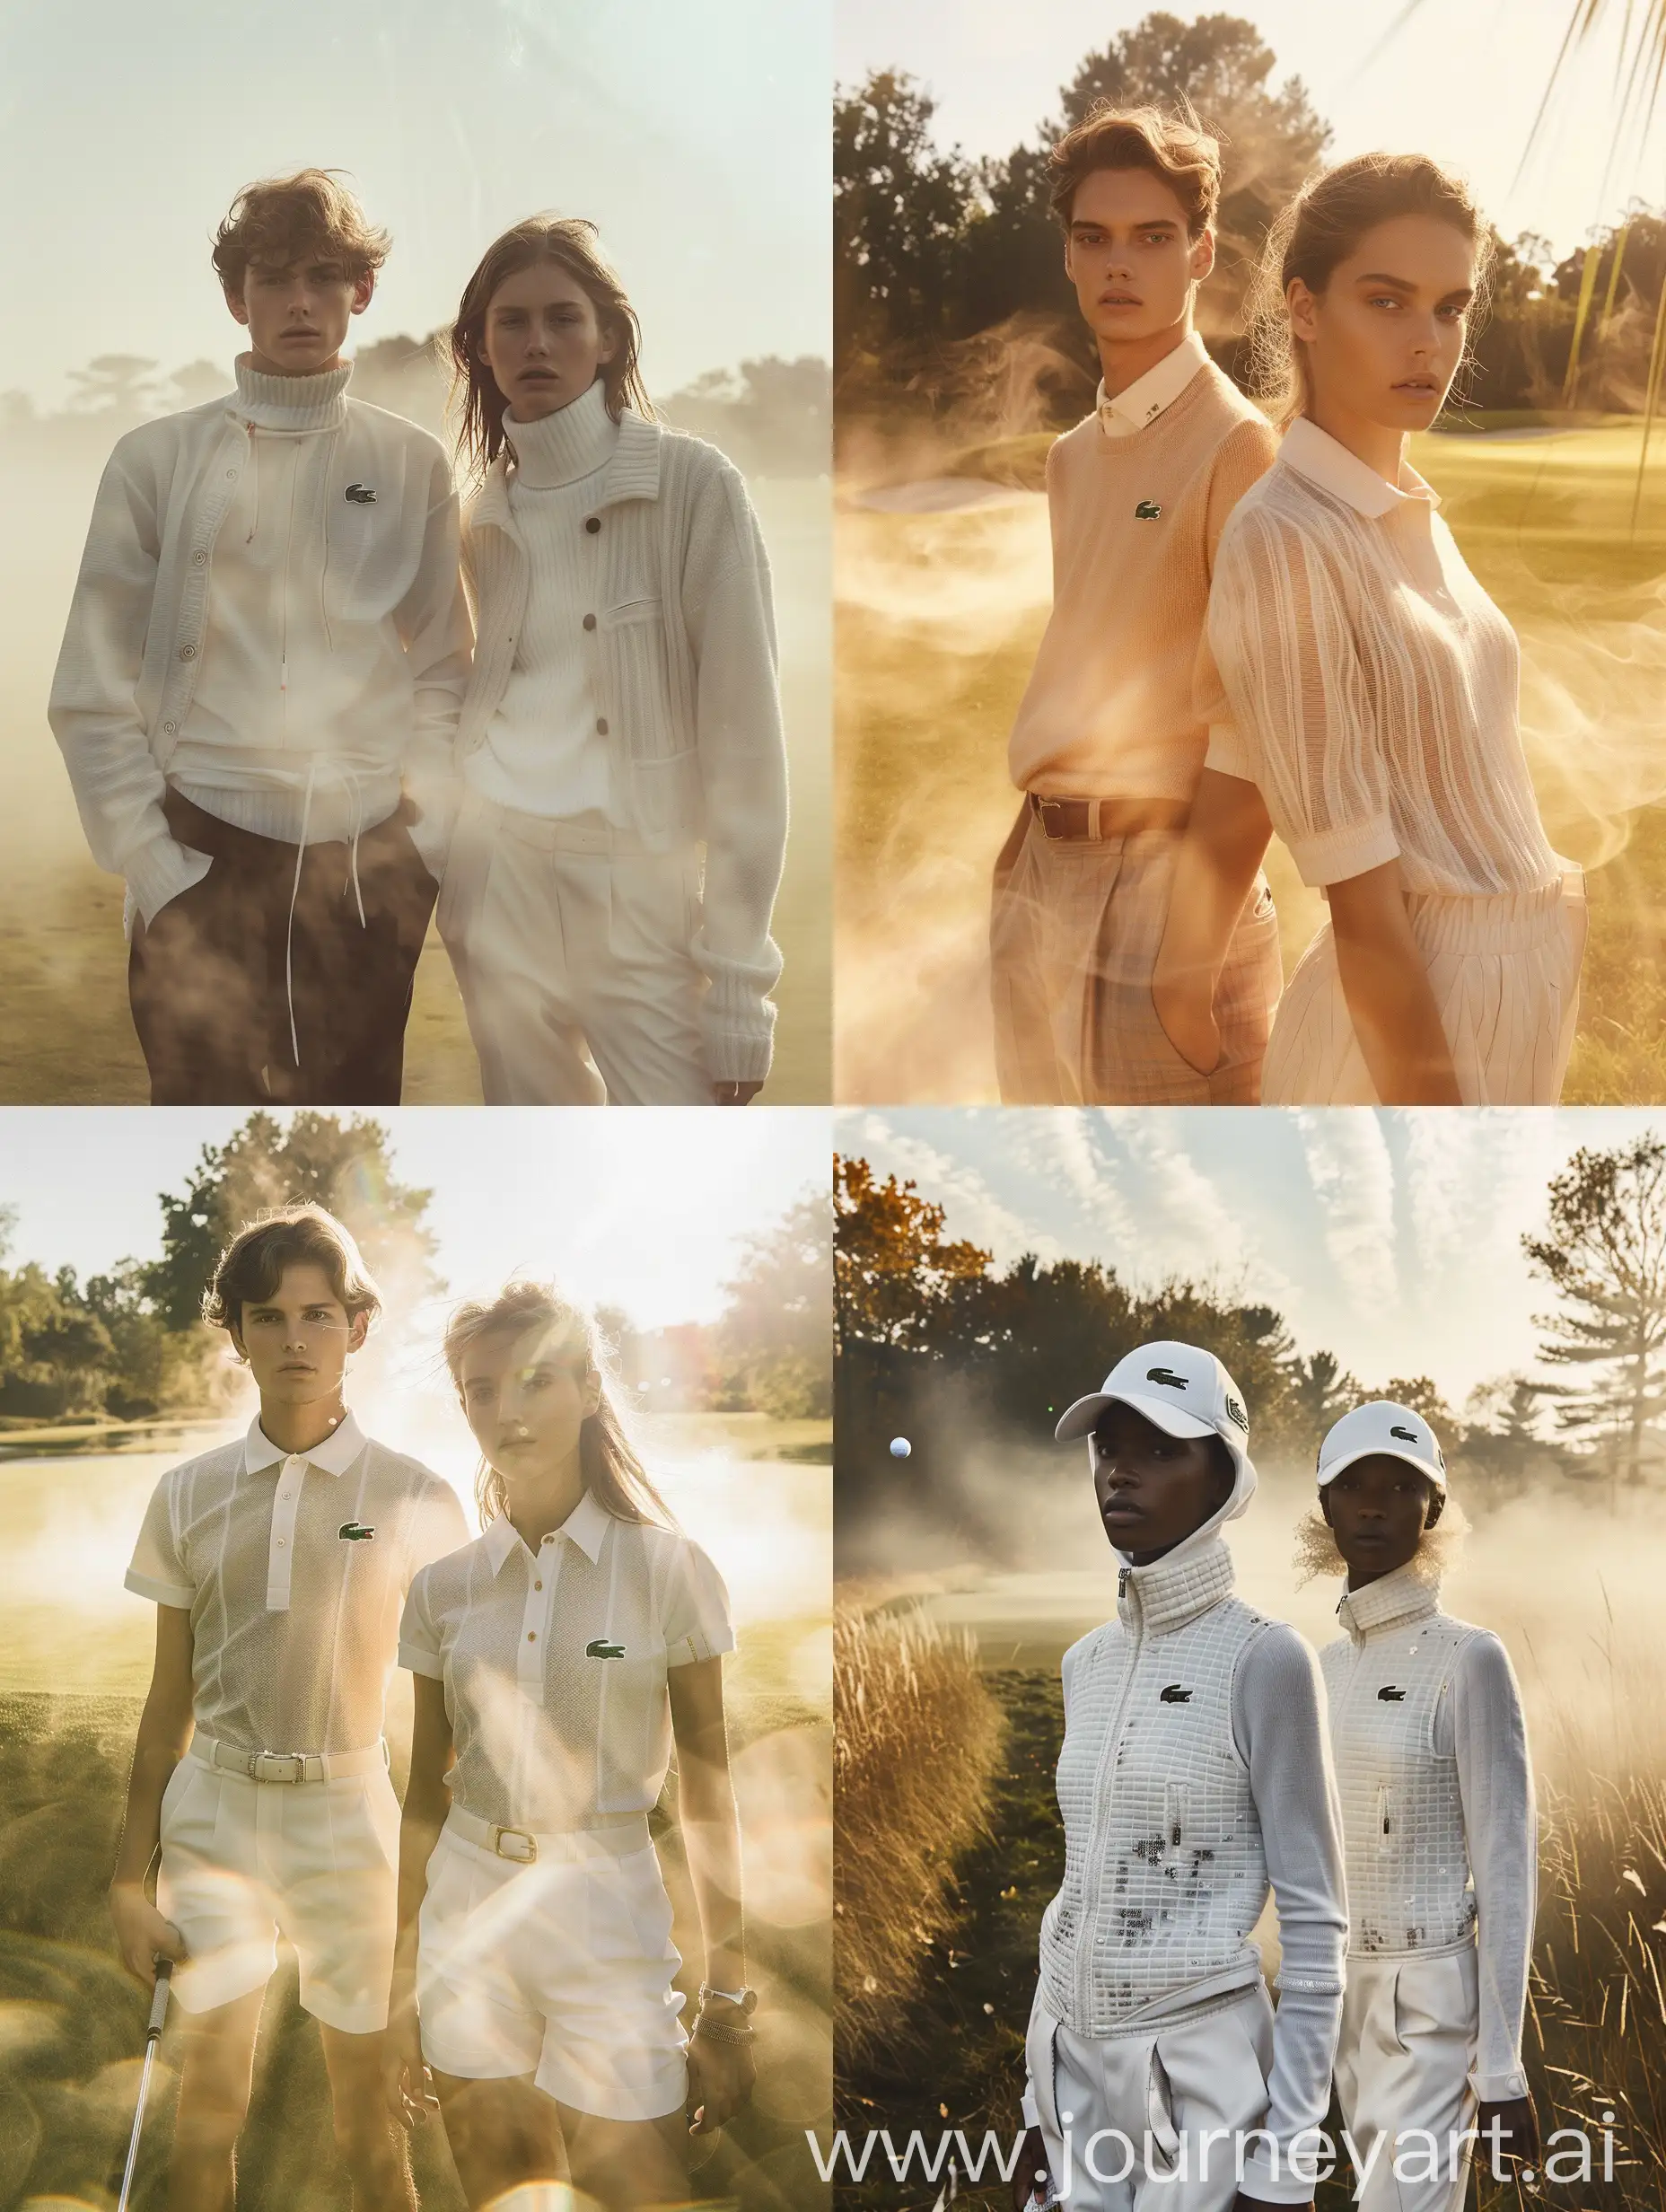 Lacoste-GOLF-Style-Duo-Models-Cinematic-Editorial-with-Confidence